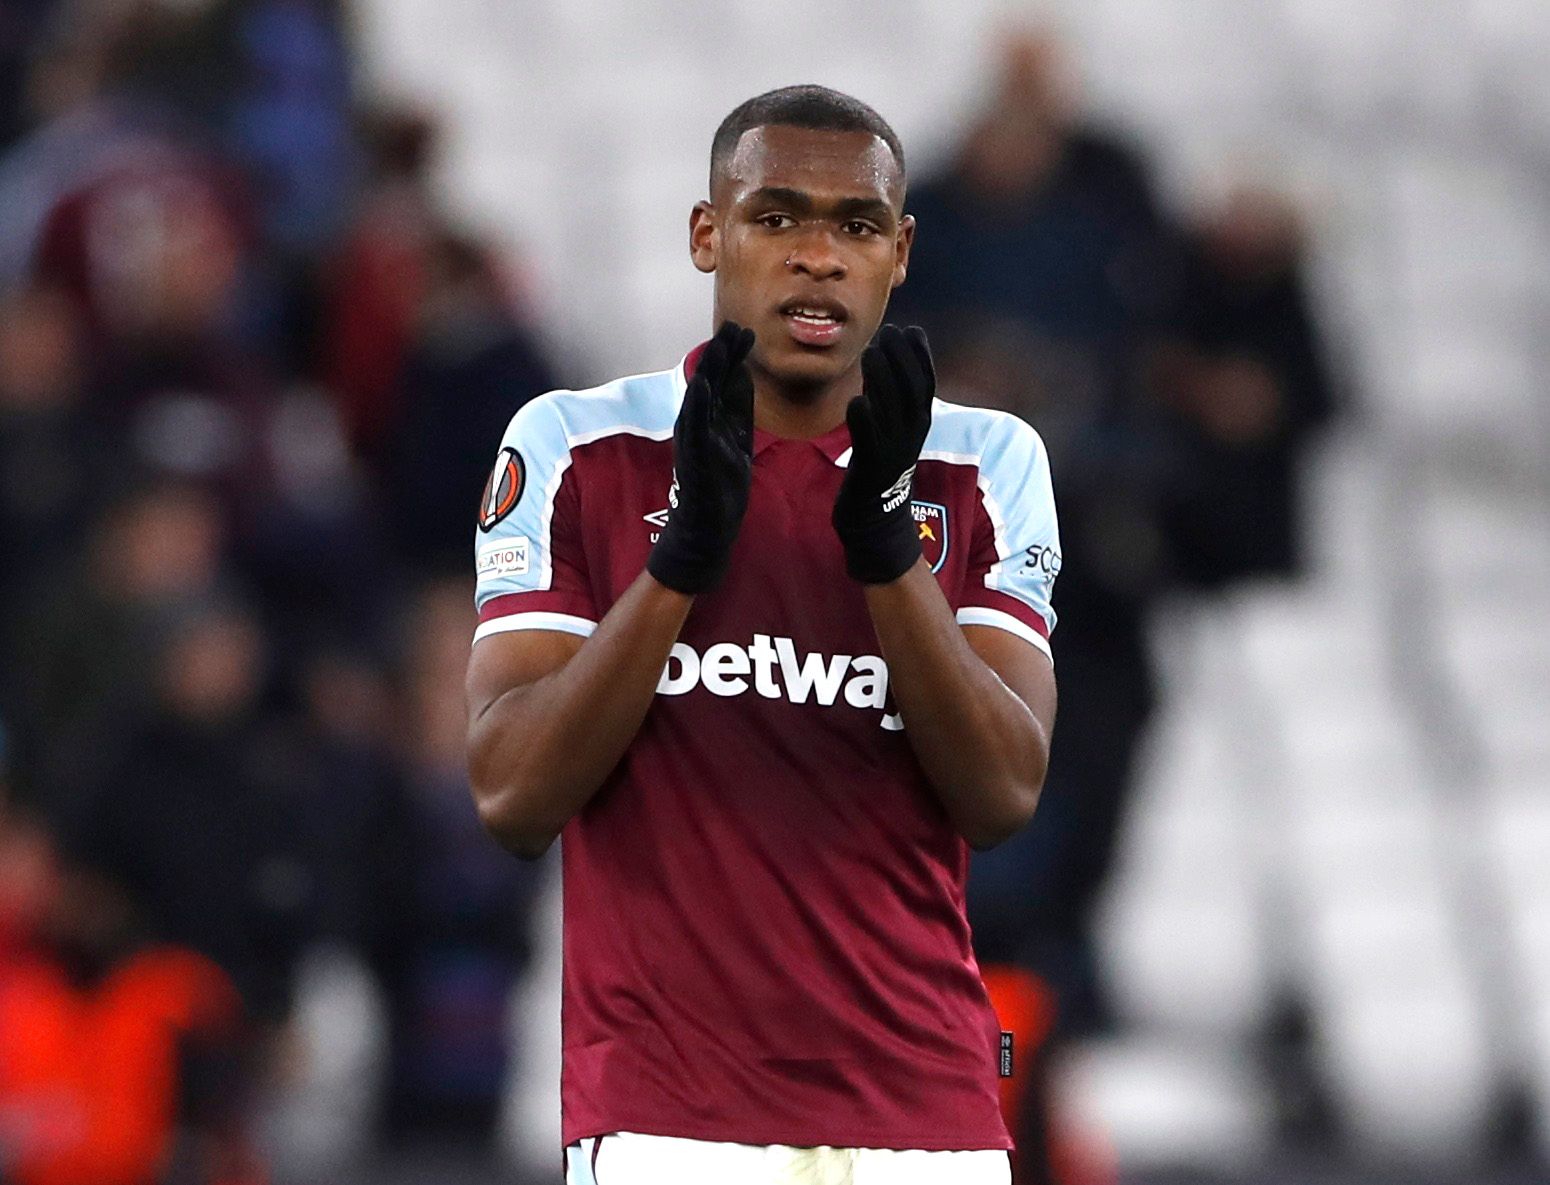 West Ham United centre-back Issa Diop